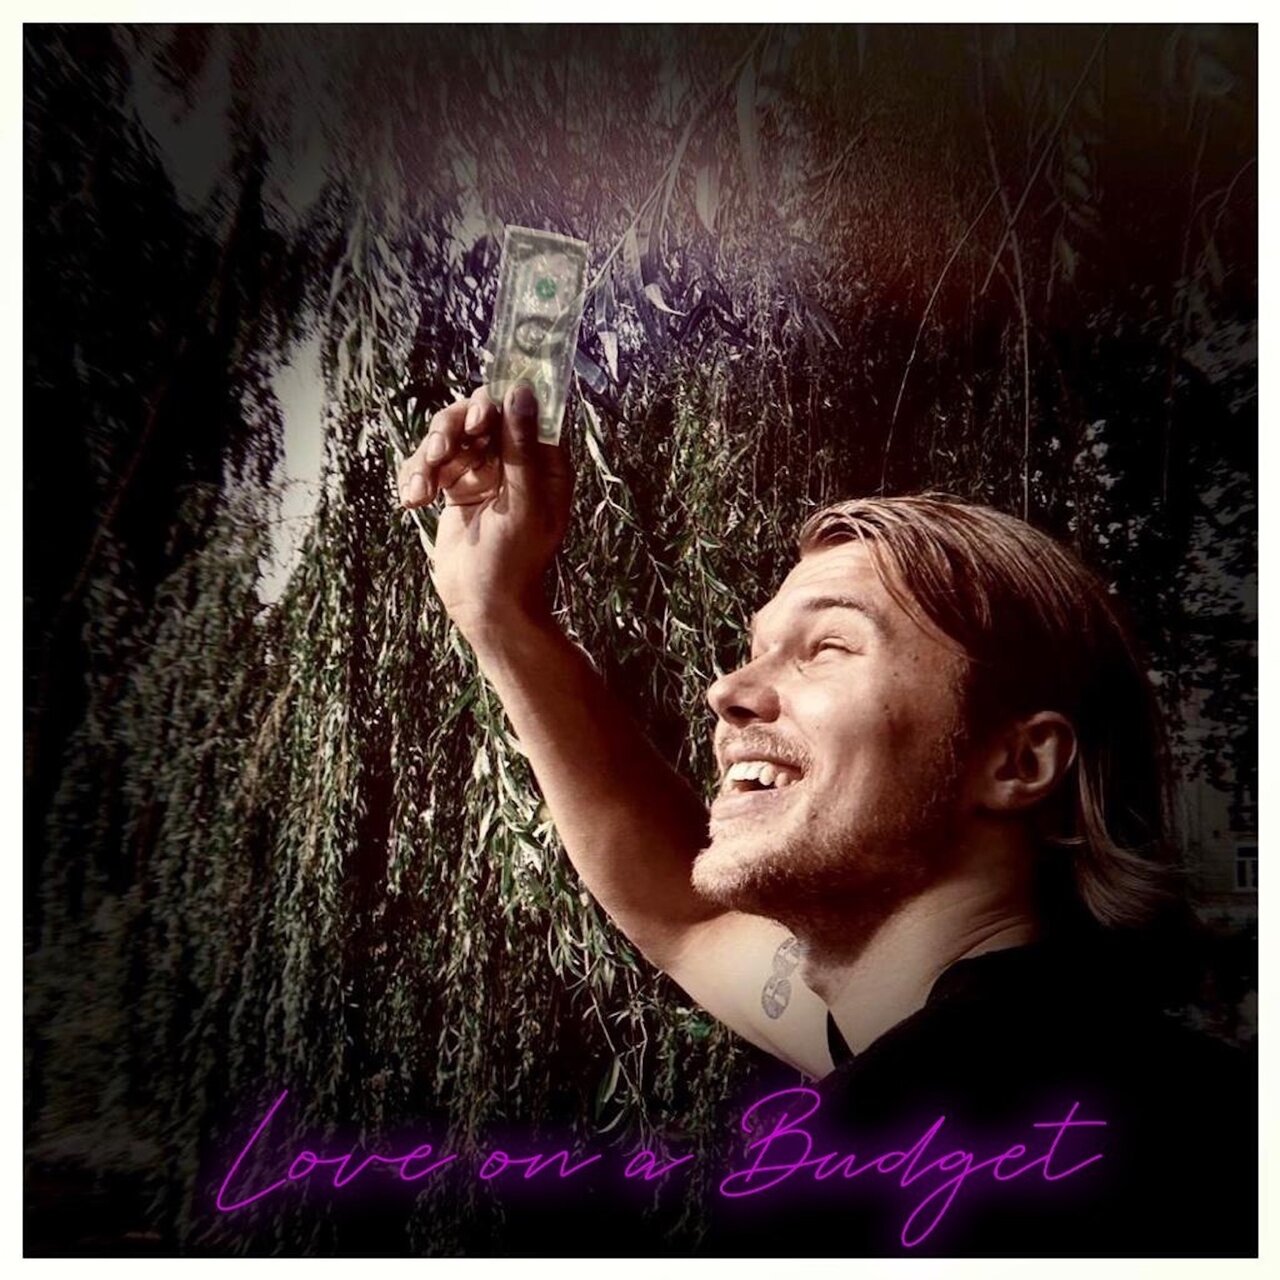 NinetyNine — Love on a Budget cover artwork